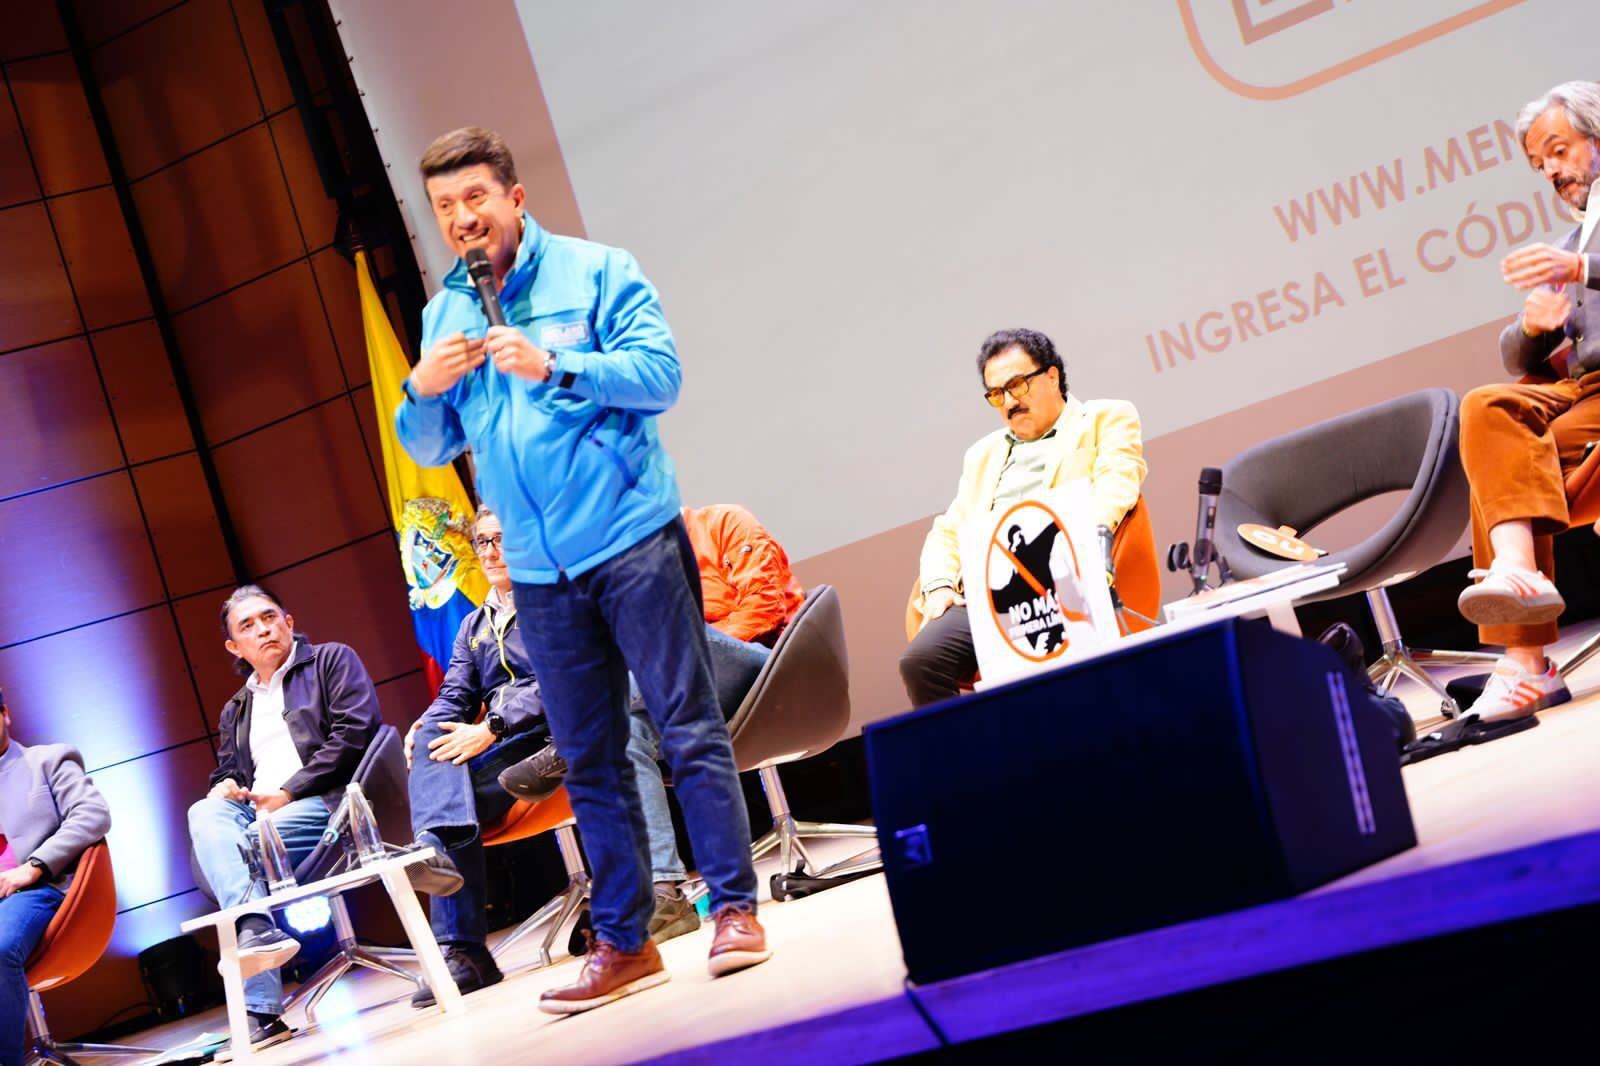 Diego Molano attacked his opponent Gustavo Bolívar in a debate of candidates for Mayor of Bogotá - credit Diego Molano